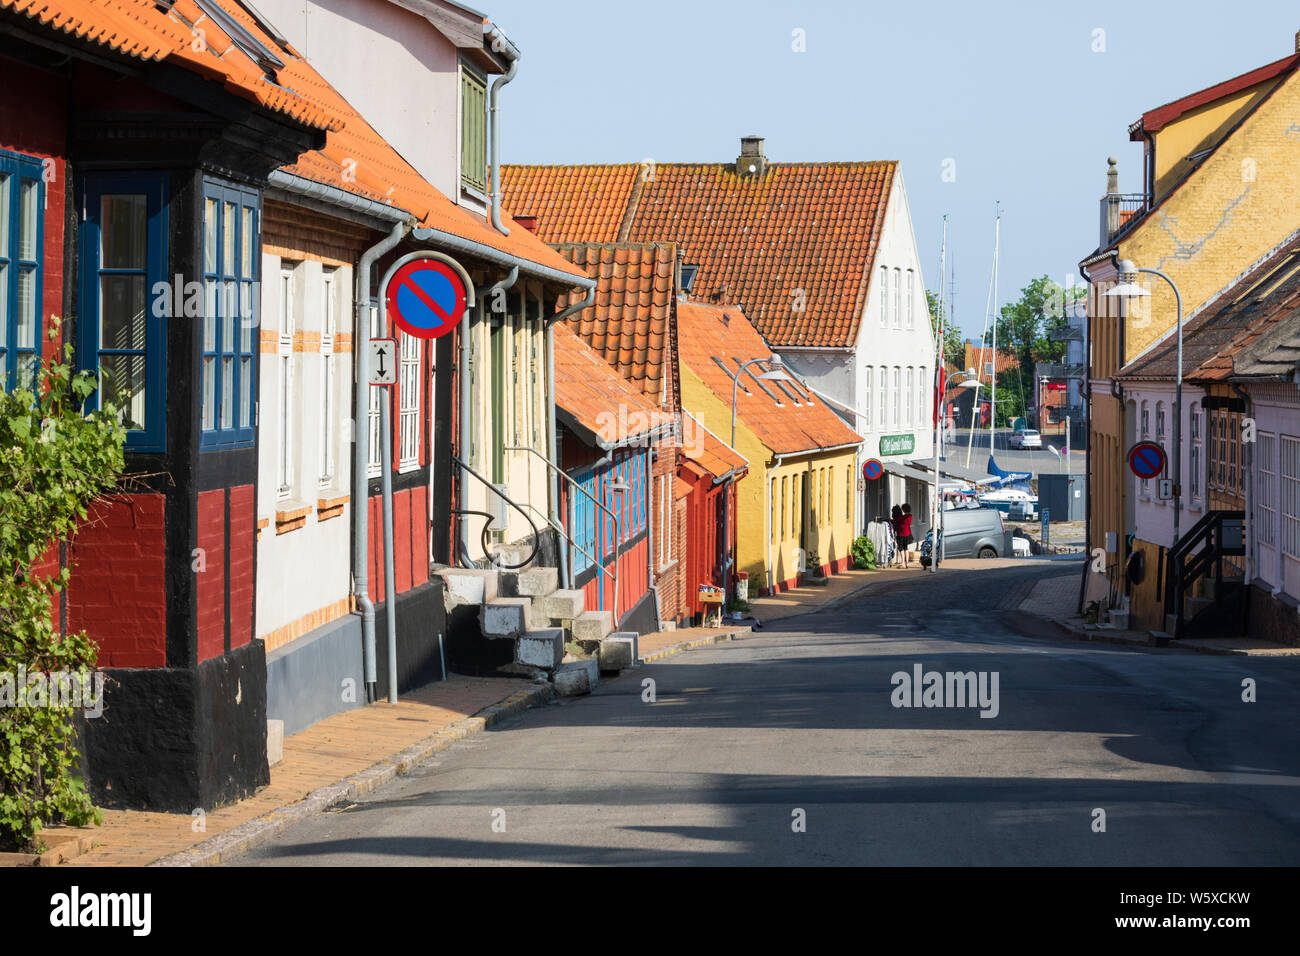 Old traditional timber framed houses along street in the old town, Allinge, Bornholm Island, Baltic Sea, Denmark, Europe Stock Photo